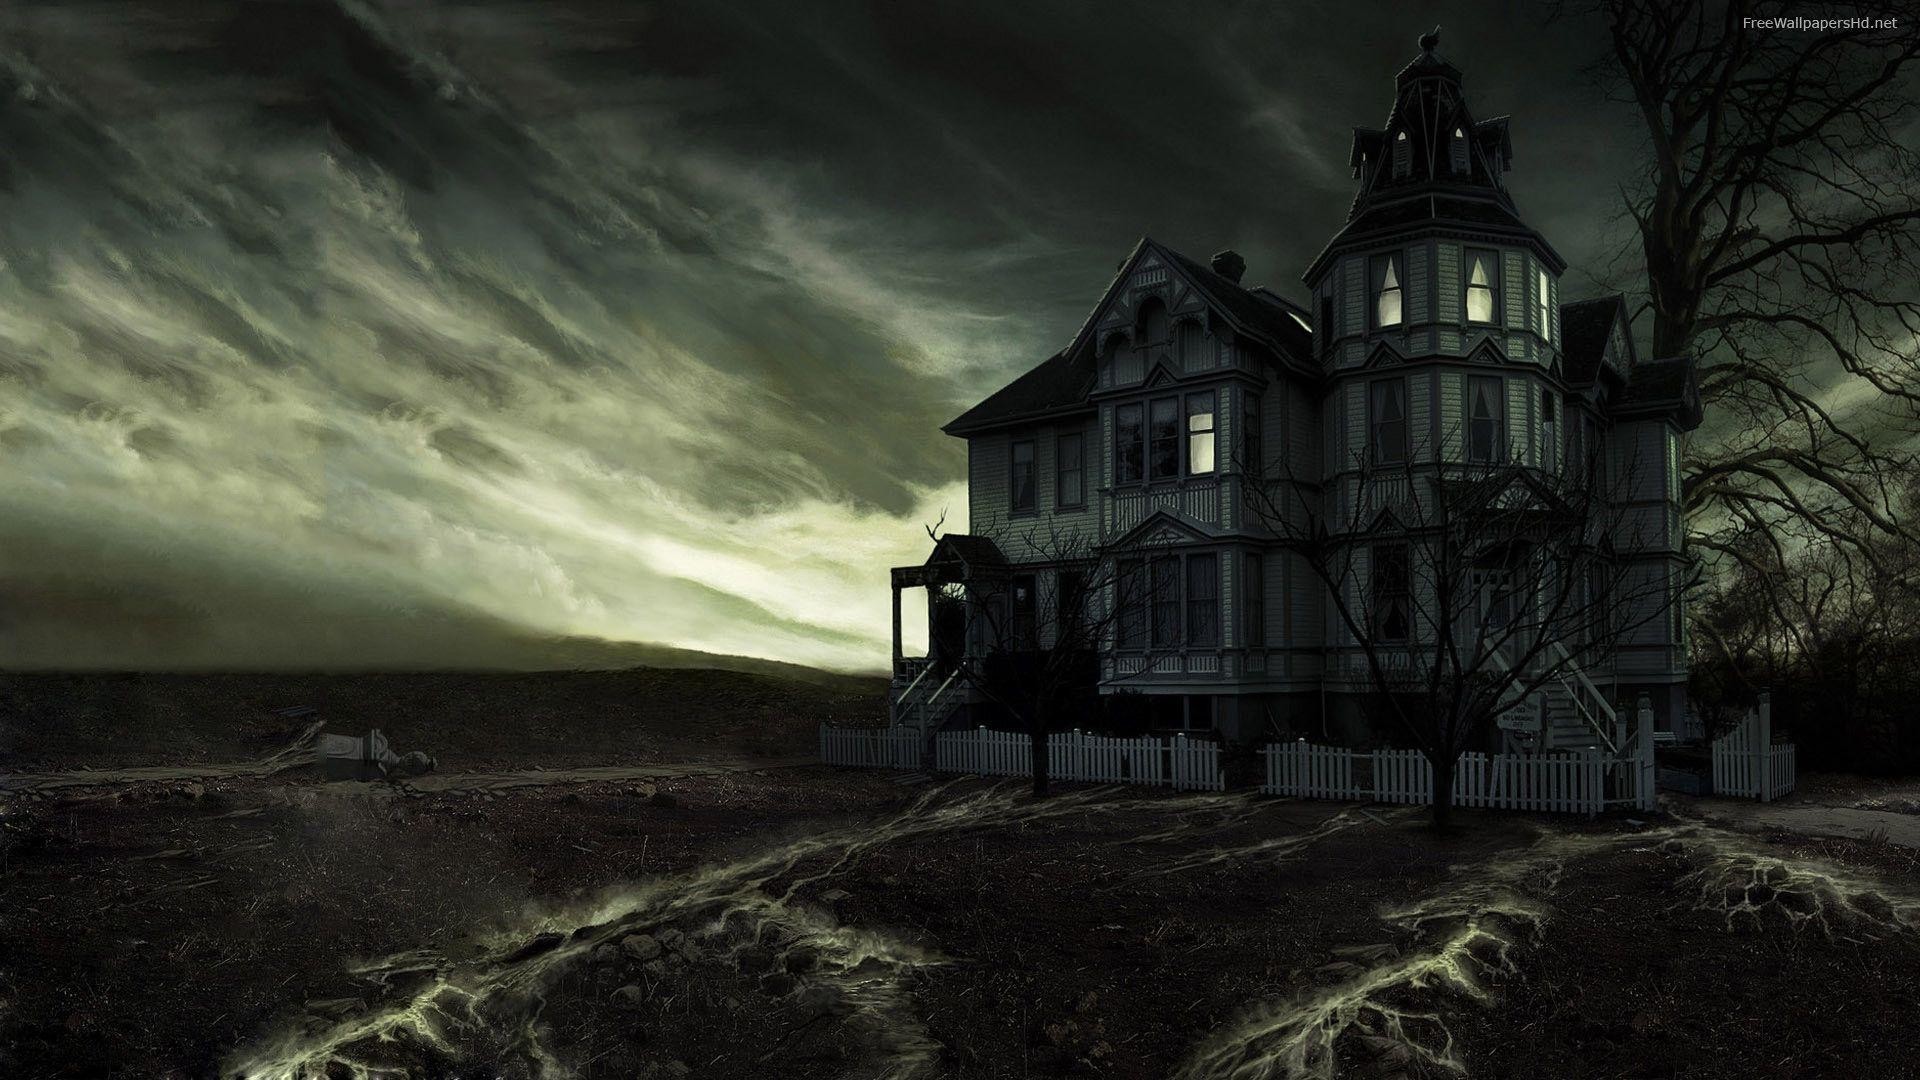 1920x1080 Wallpapers For > Haunted House Wallpapers Hd